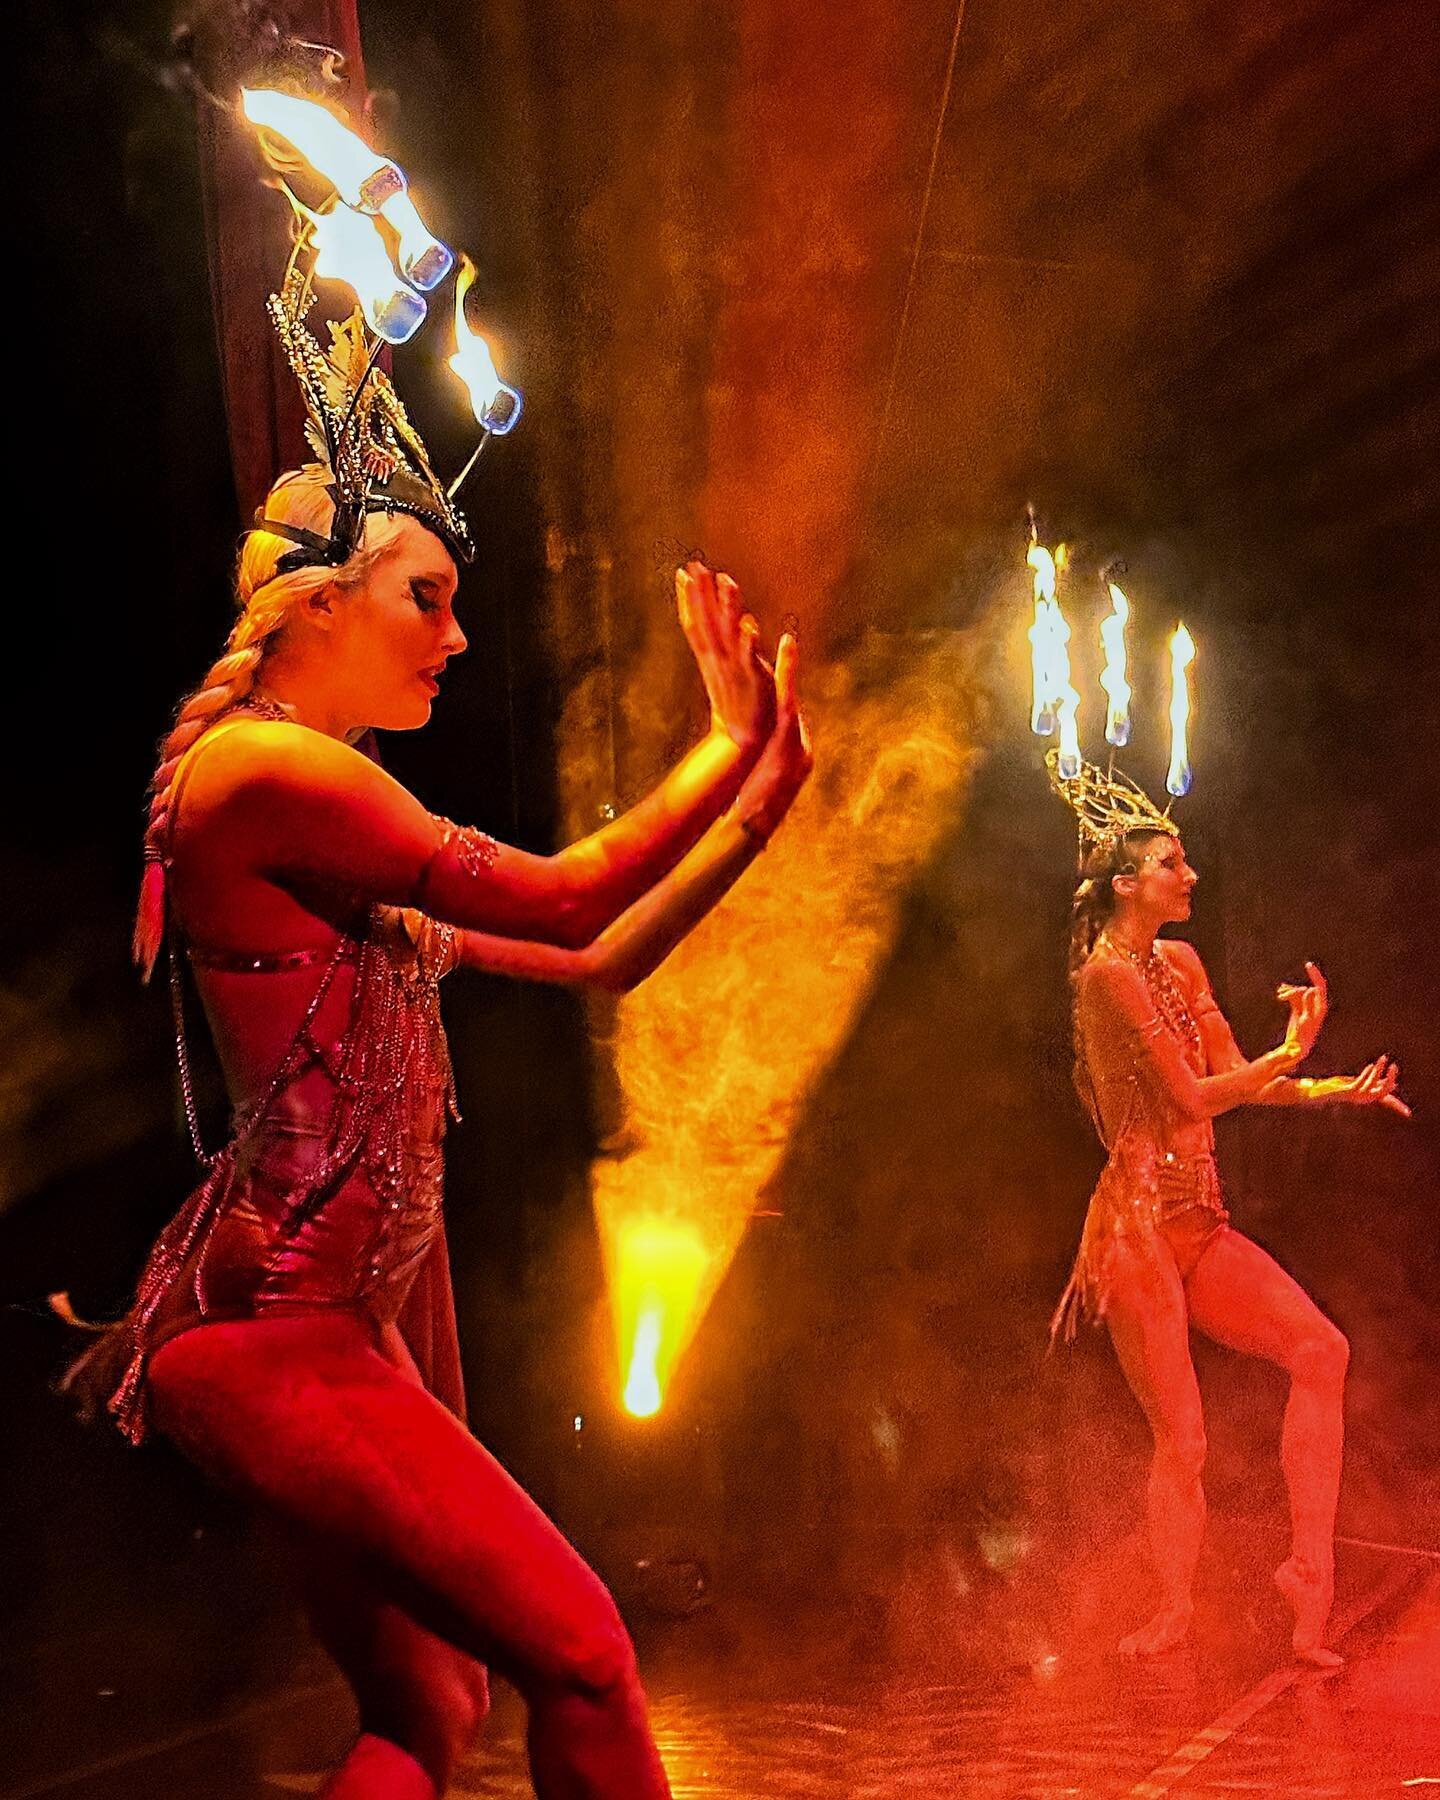 The sexiest show in KC is back for just two months! @sensatia_cabaret (by the amazing team at @quixoticfusion) is part cabaret, part cirque, and definitely a show you can&rsquo;t miss! 

This is the perfect date night with stunning performances, live